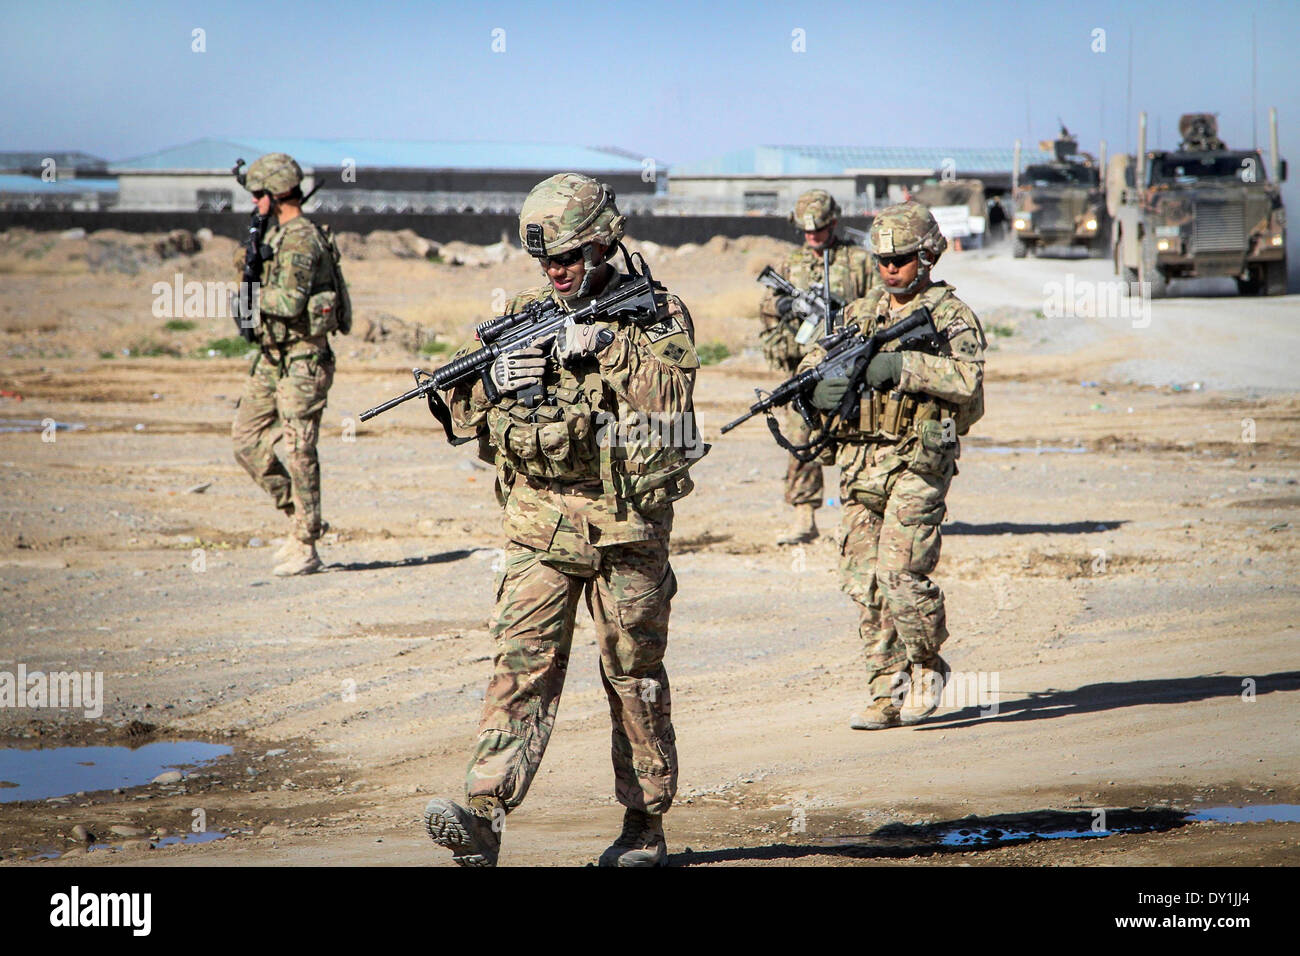 US soldiers with Forward Support Company, 65th Engineer Battalion conduct a patrol March 26, 2014 in Kandahar province, Afghanistan. Stock Photo